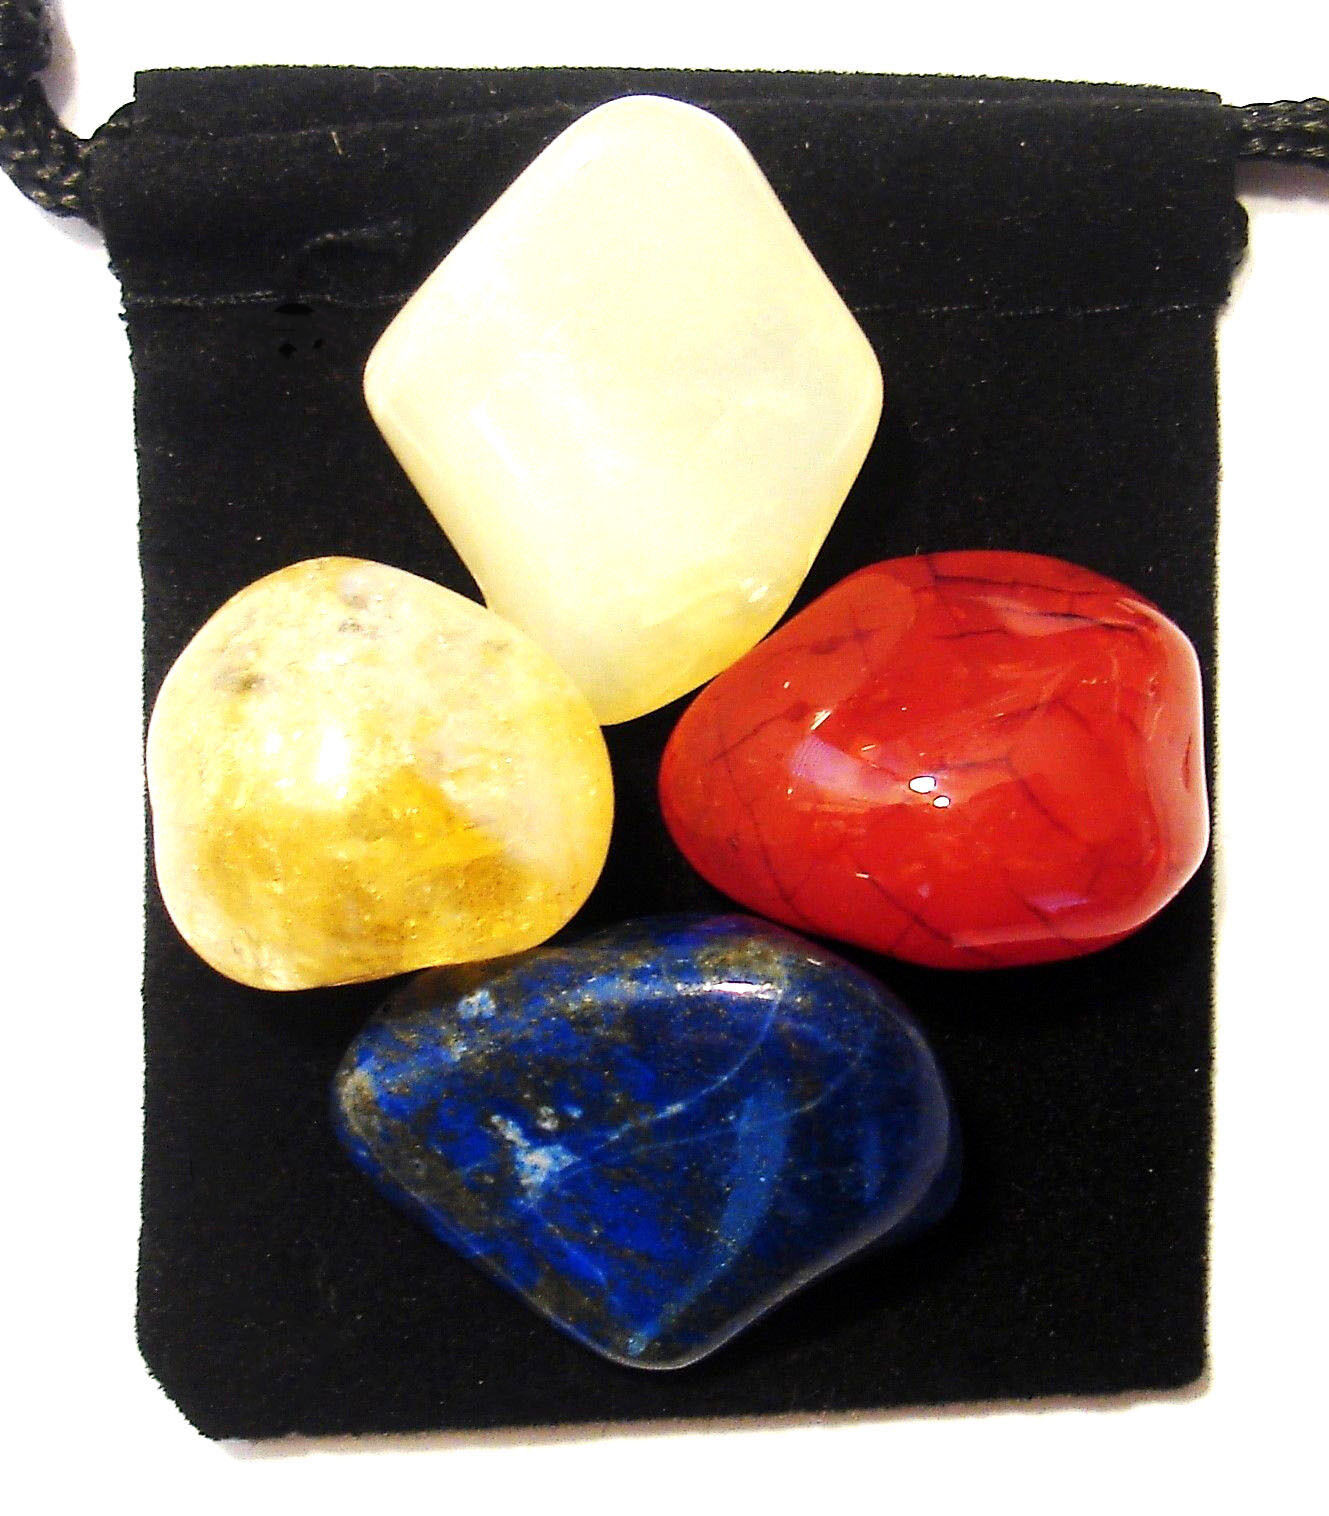 MENOPAUSE RELIEF Tumbled Crystal Healing Set =4 Stones +Pouch +Description Card